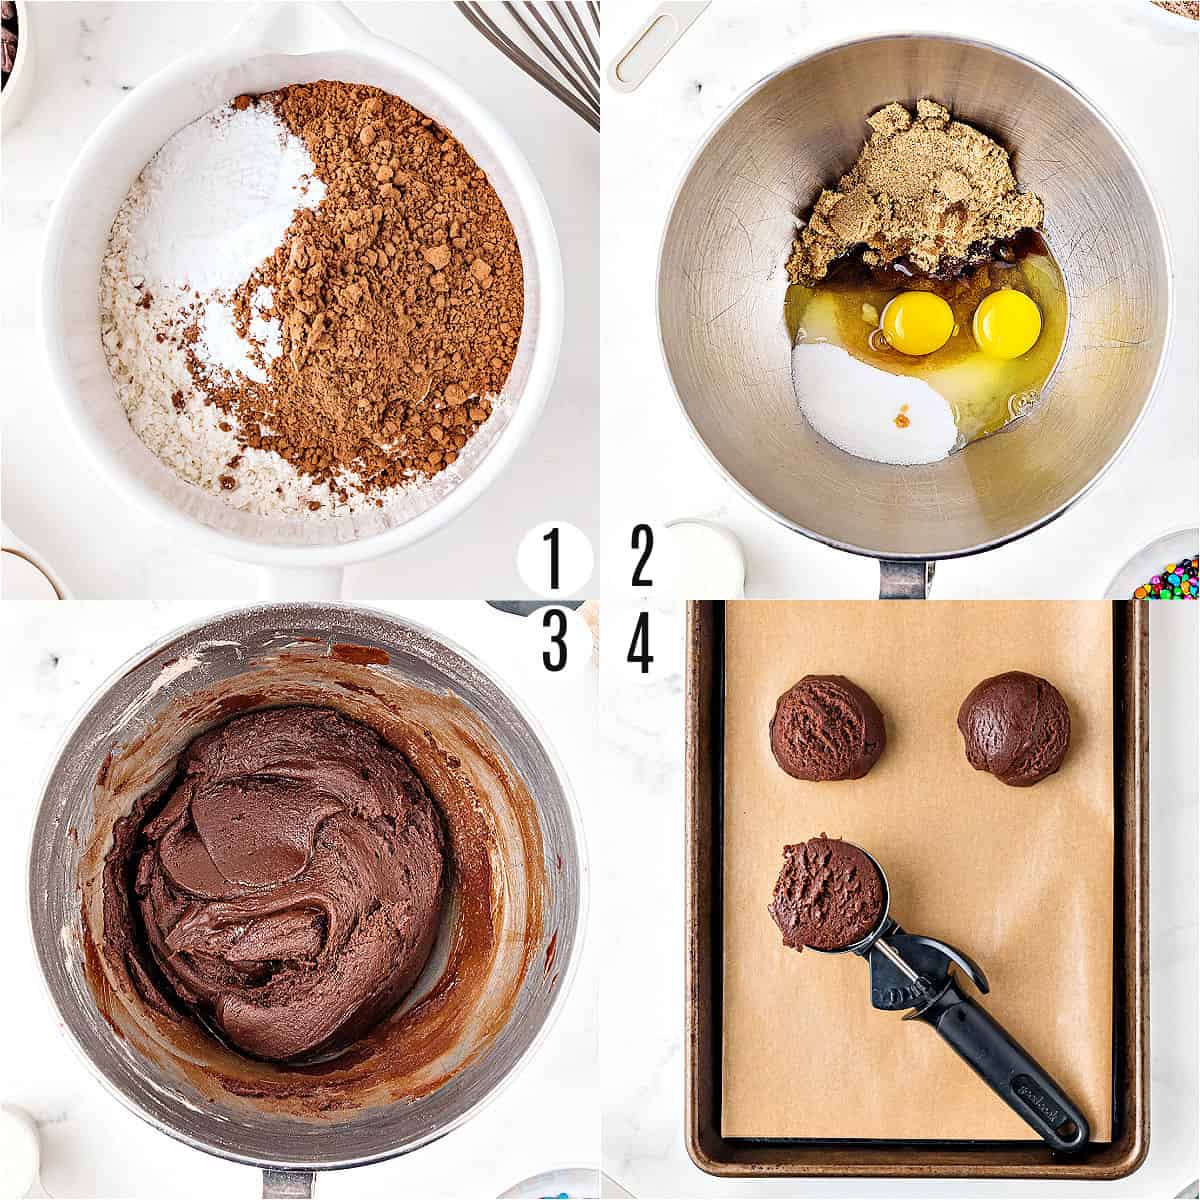 Step by step photos showing how to make cosmic brownie cookie dough.